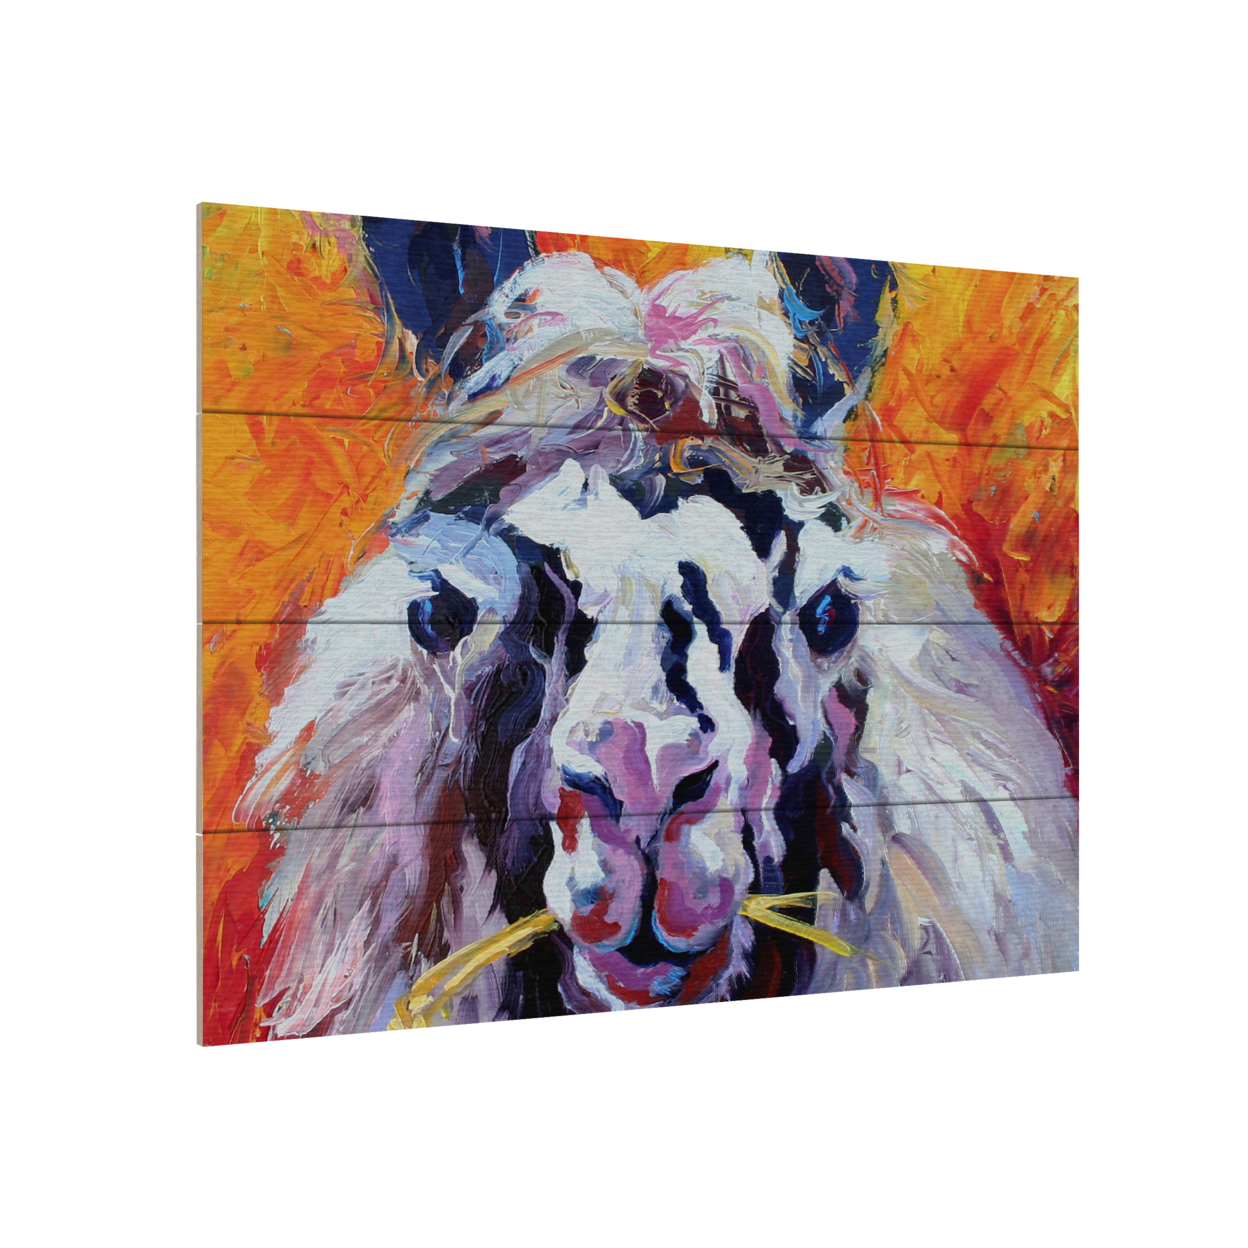 Wall Art 12 X 16 Inches Titled Llama III Ready To Hang Printed On Wooden Planks